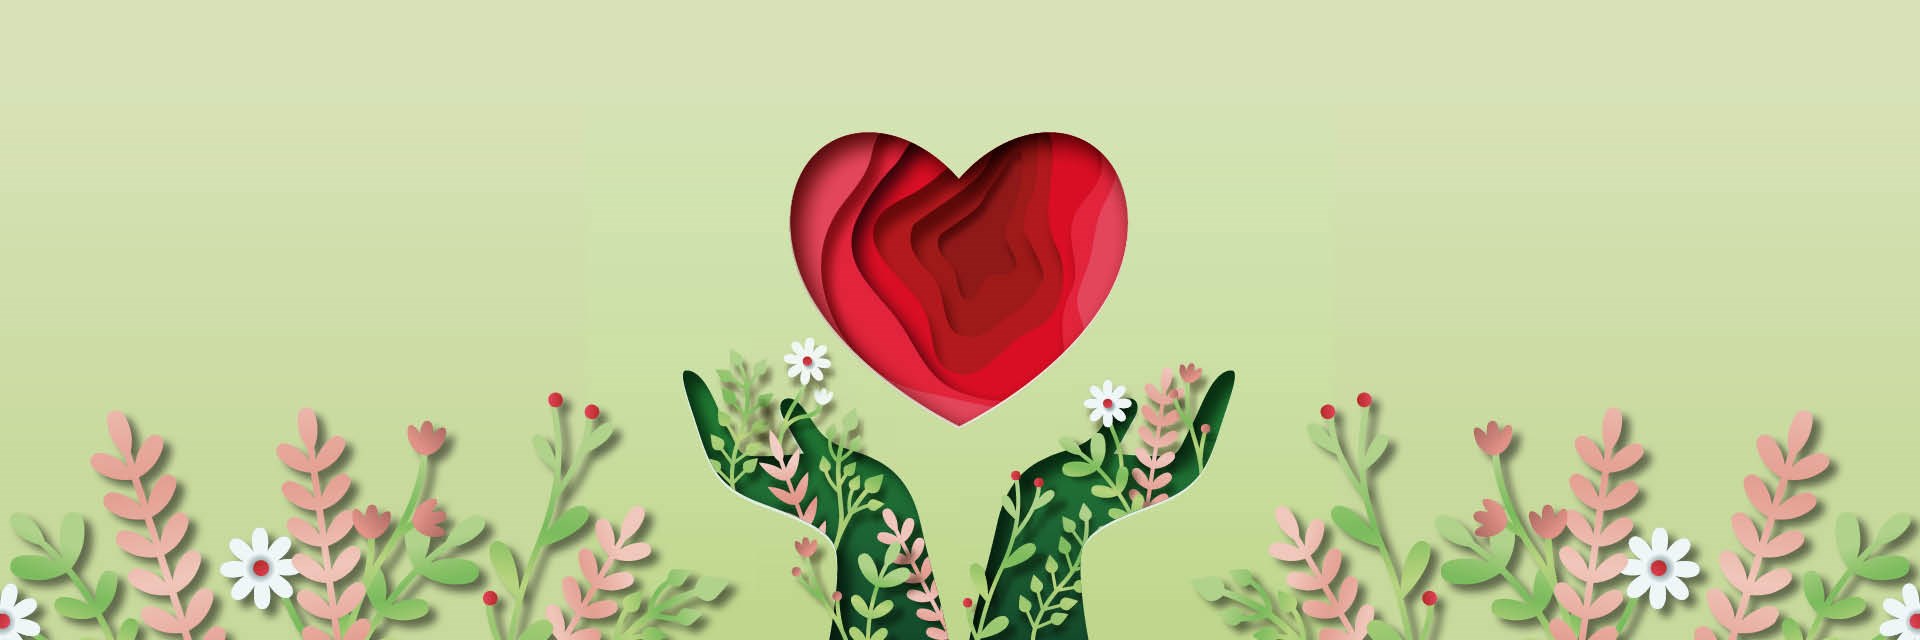 Illustration of two hands made of flowers holding a heart